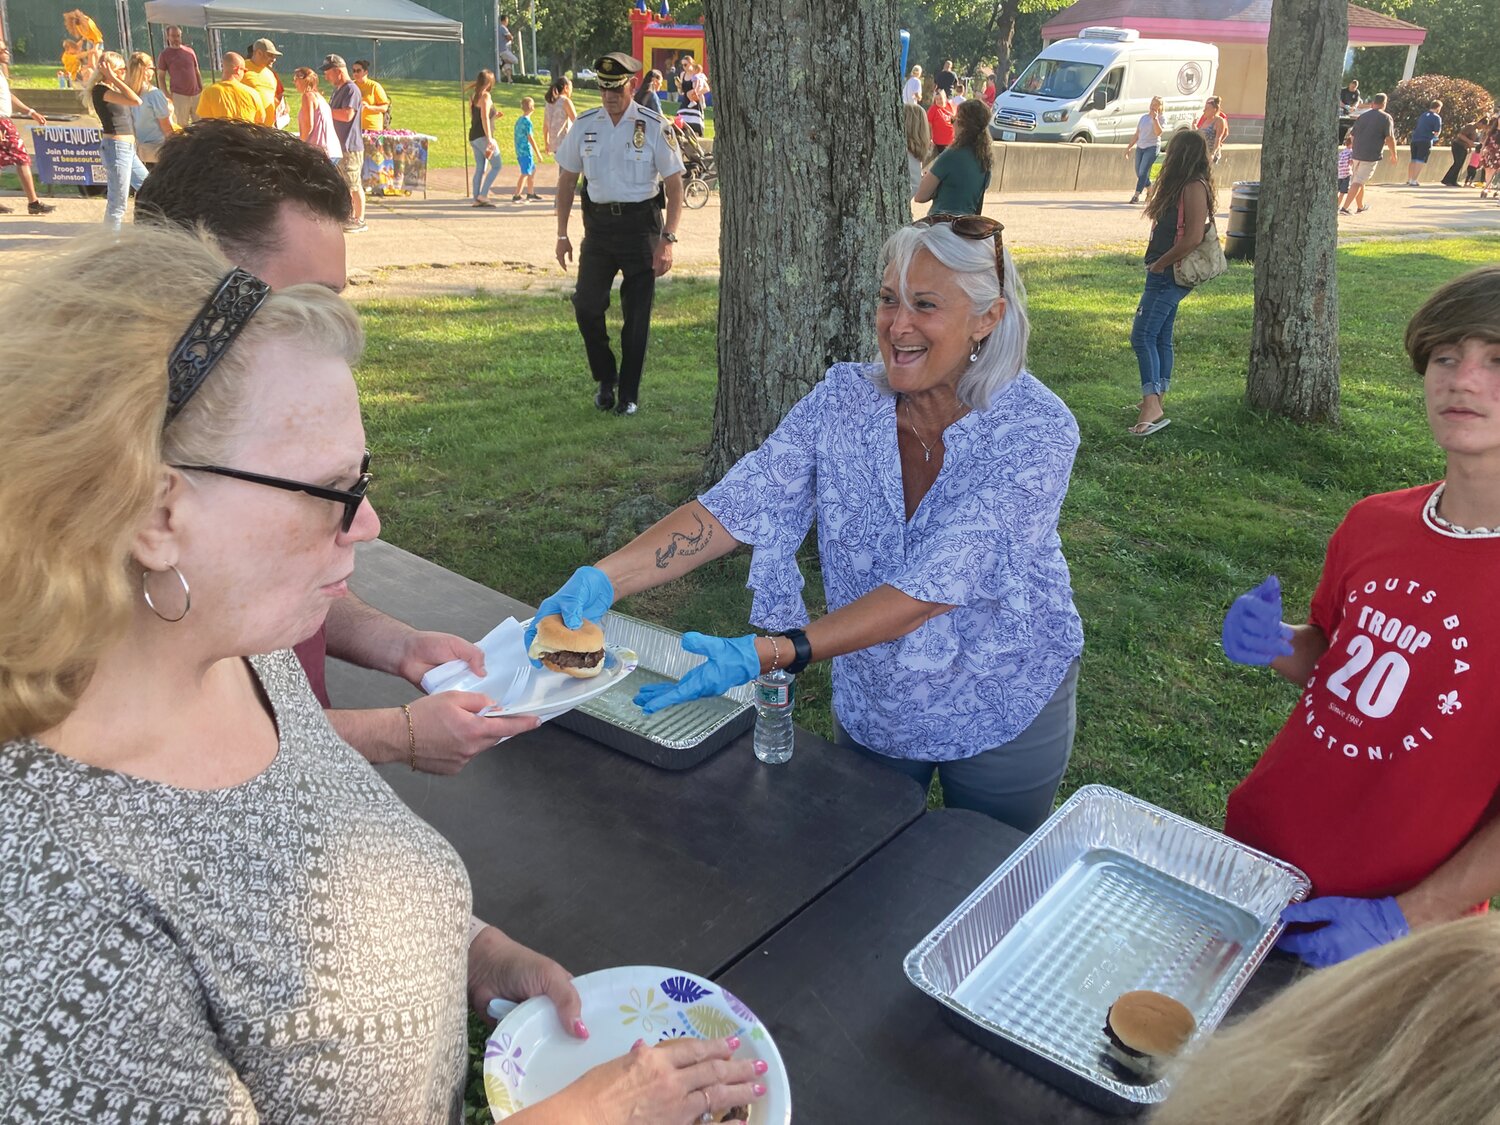 BURGER BUDDY: Councilwoman Lauren Garzone raced to fill attendees' plates with burgers from the grill.